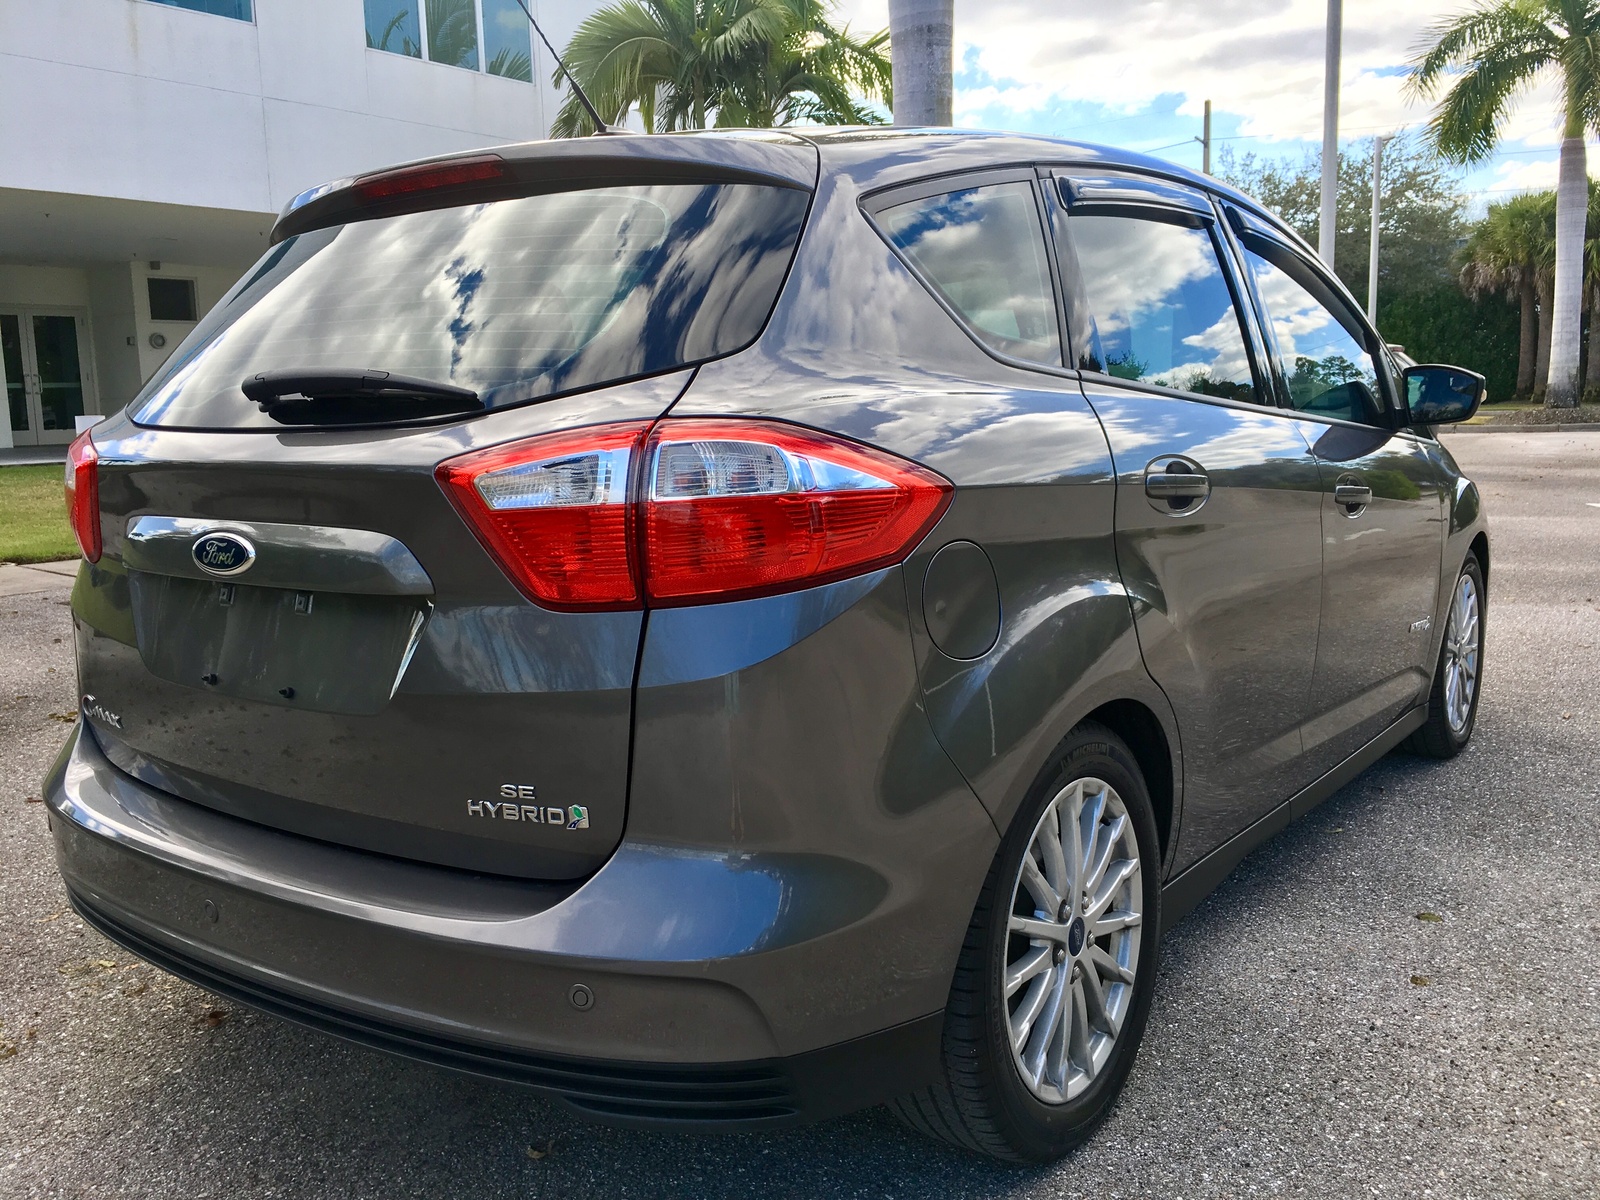 13 Ford C Max Hybrid Test Drive Review Cargurus